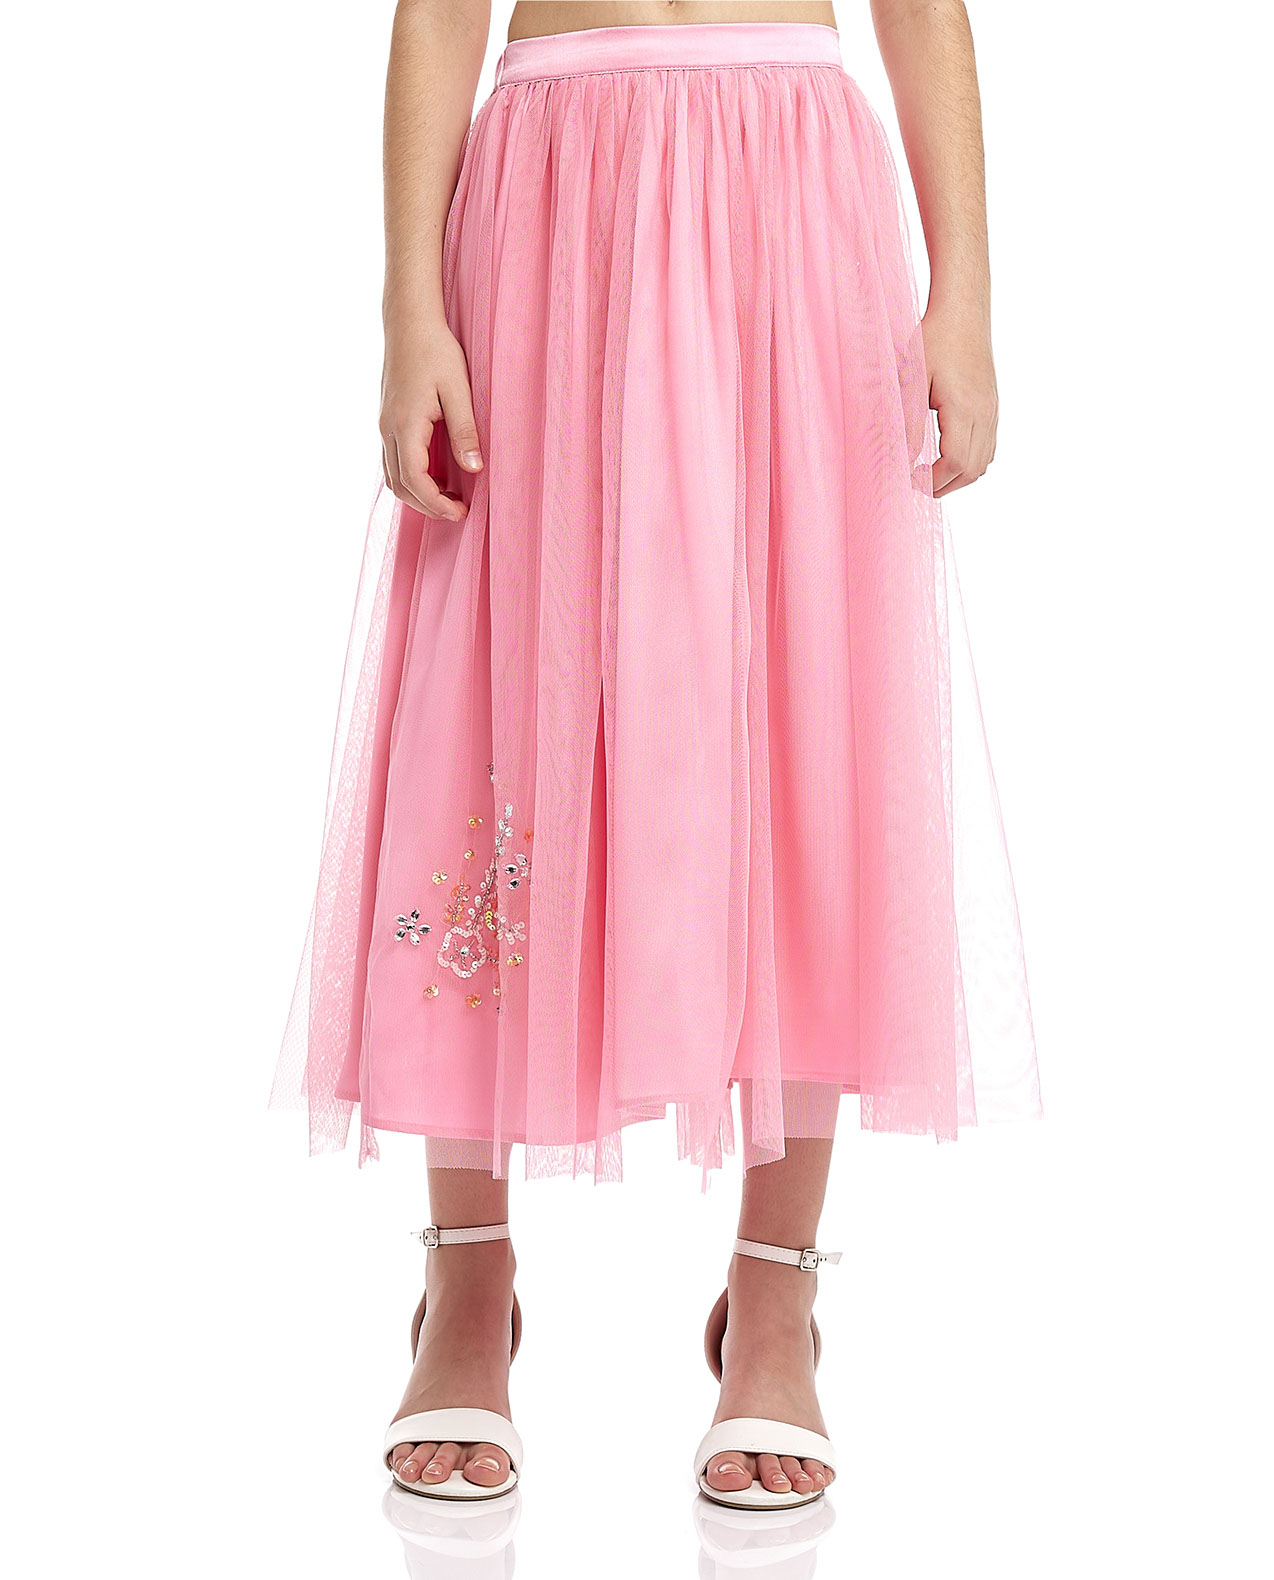 Embroidered Top and Tulle Skirt Set